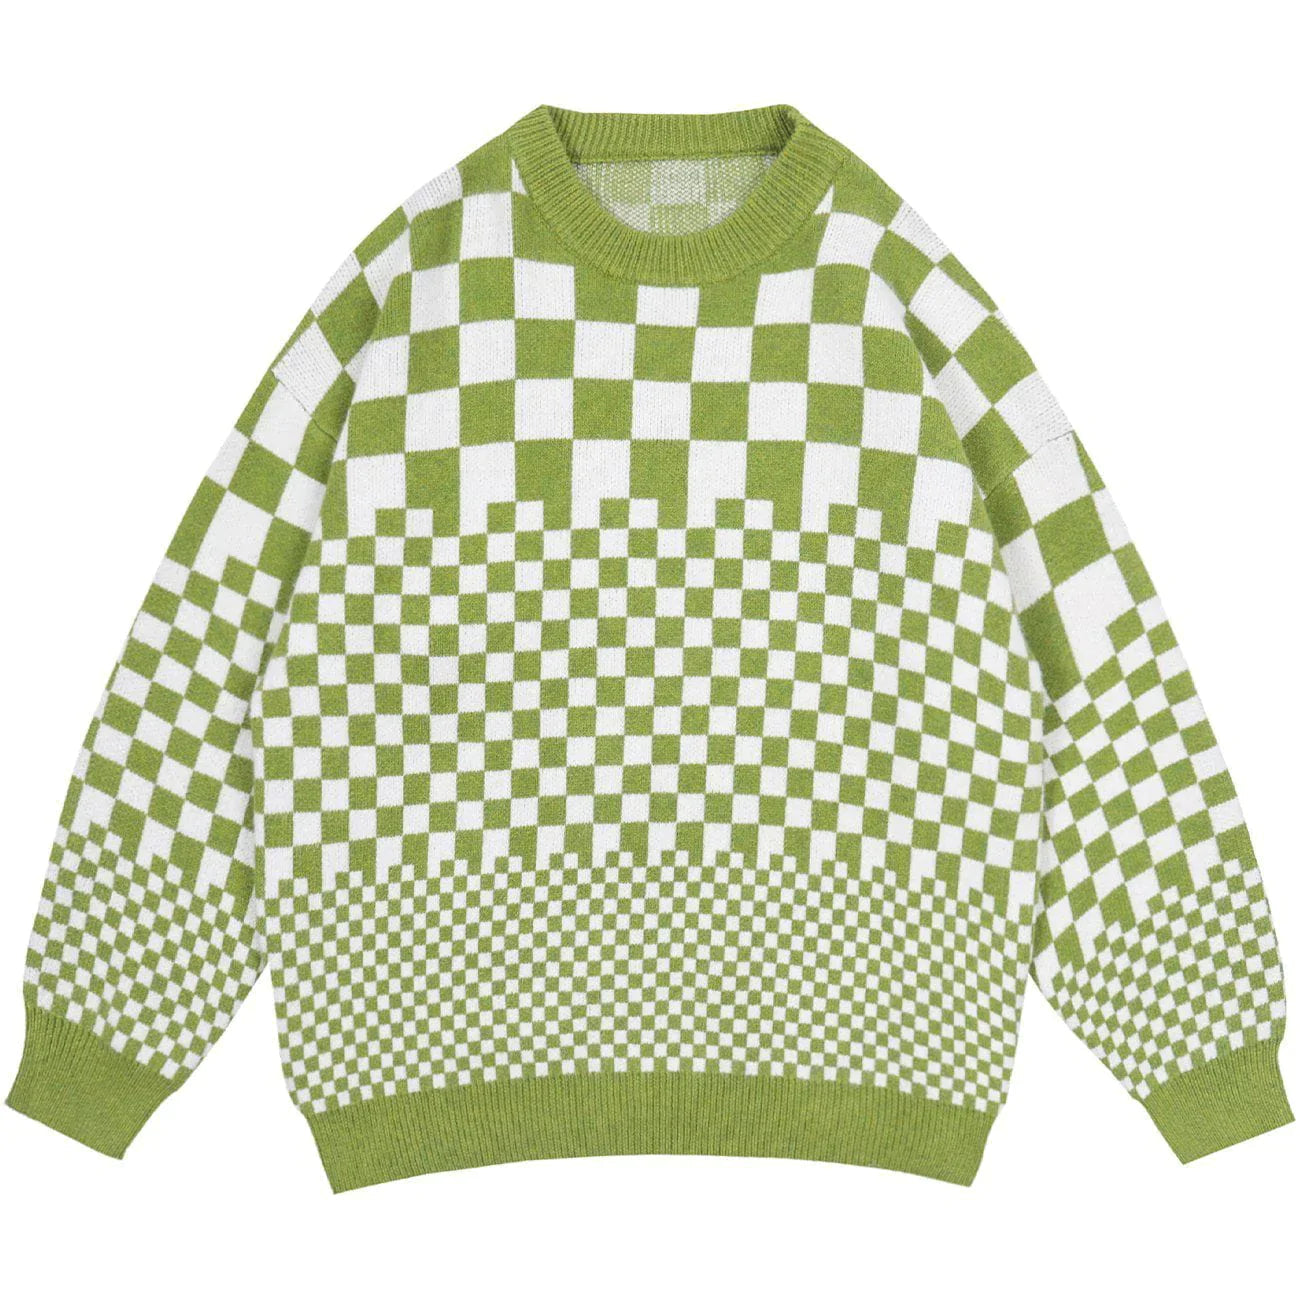 Majesda® - Vintage Checkerboard Plaid Knit Sweater outfit ideas streetwear fashion